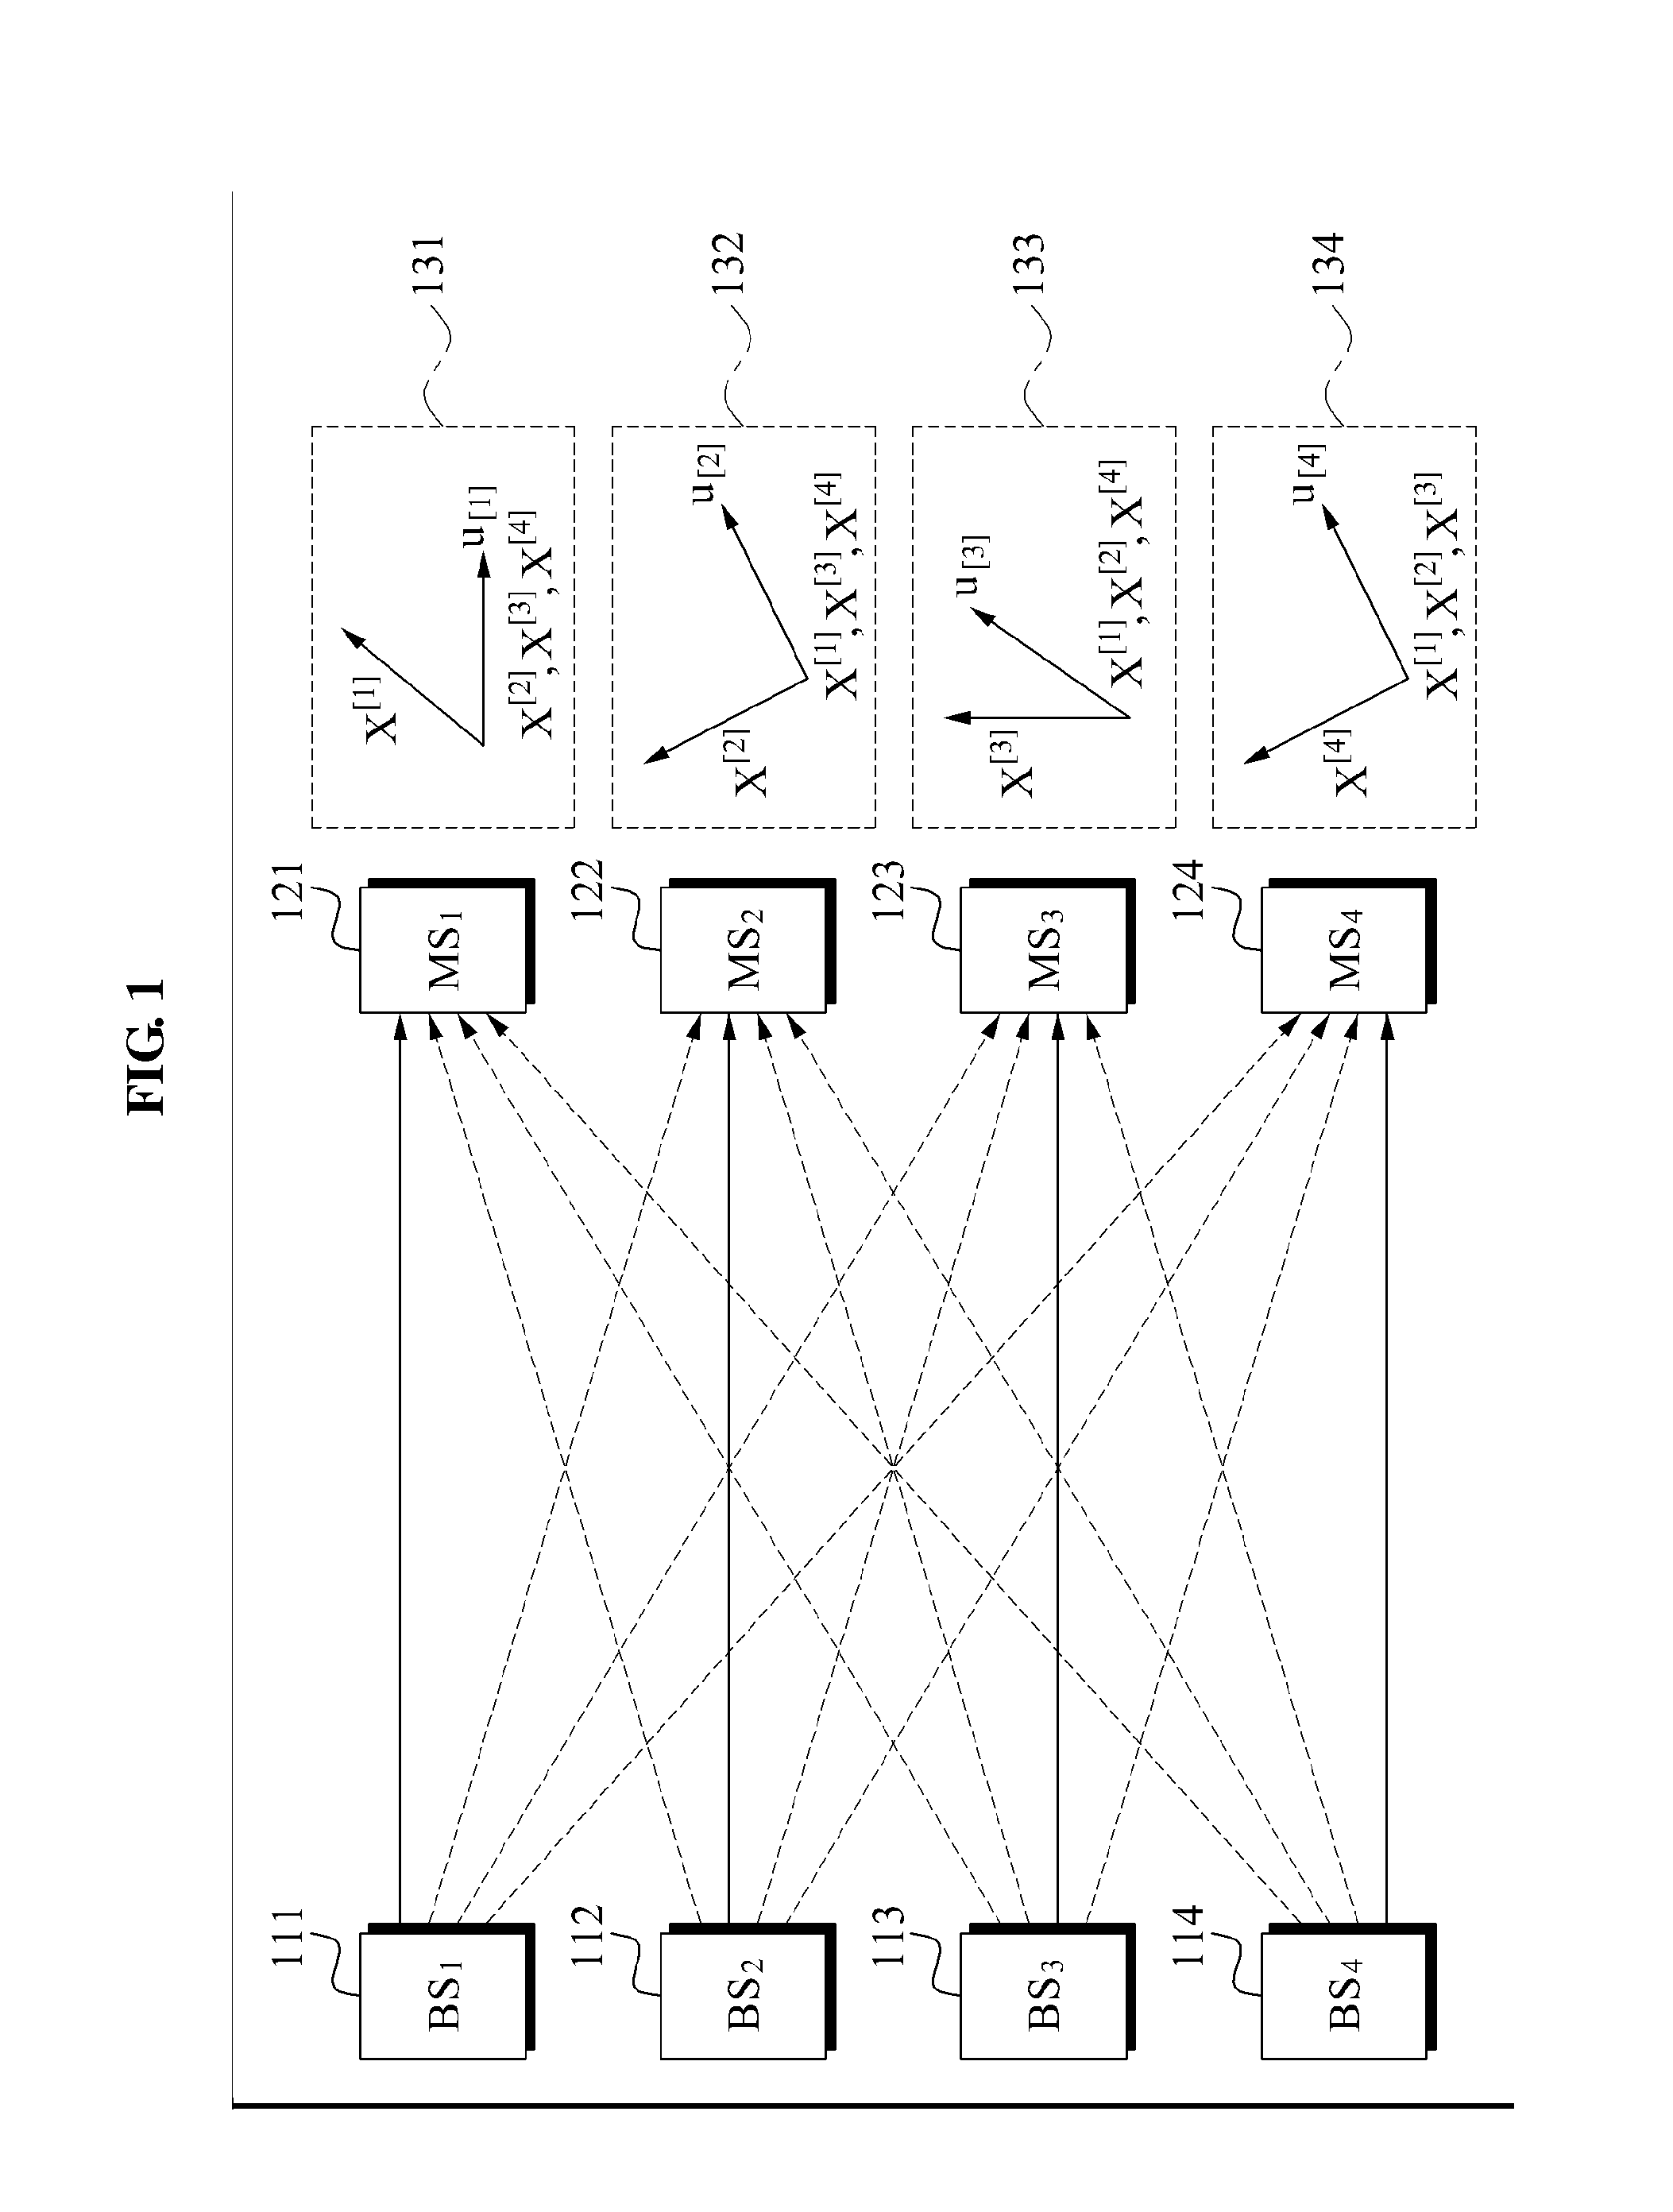 Adaptive interference alignment precoding and decoding to prevent multi-cell interference